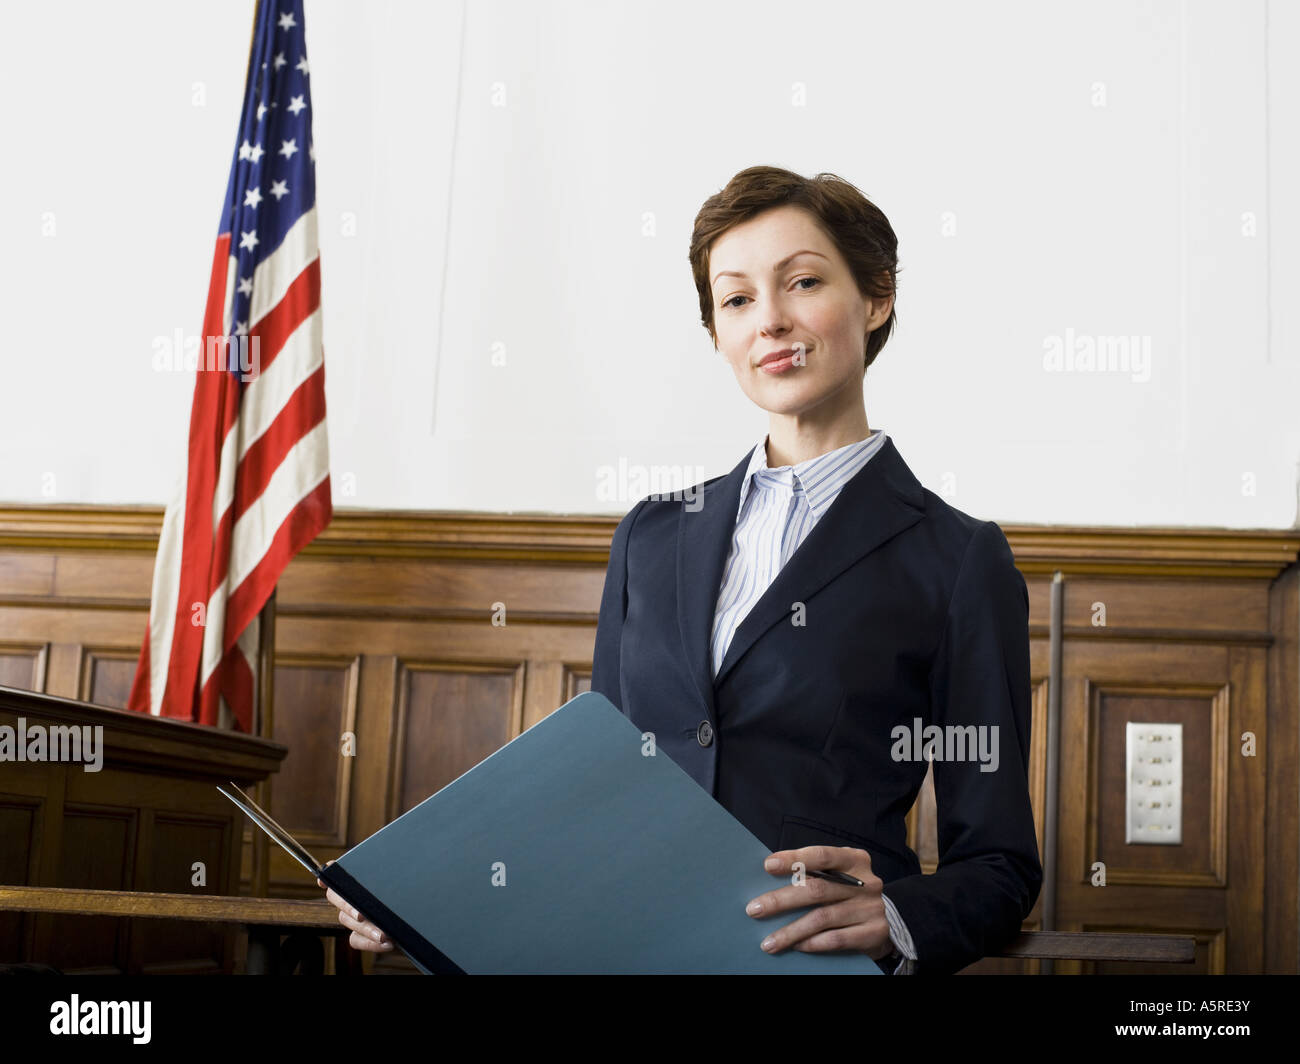 Portrait of a female lawyer standing in a courtroom and smiling Stock Photo